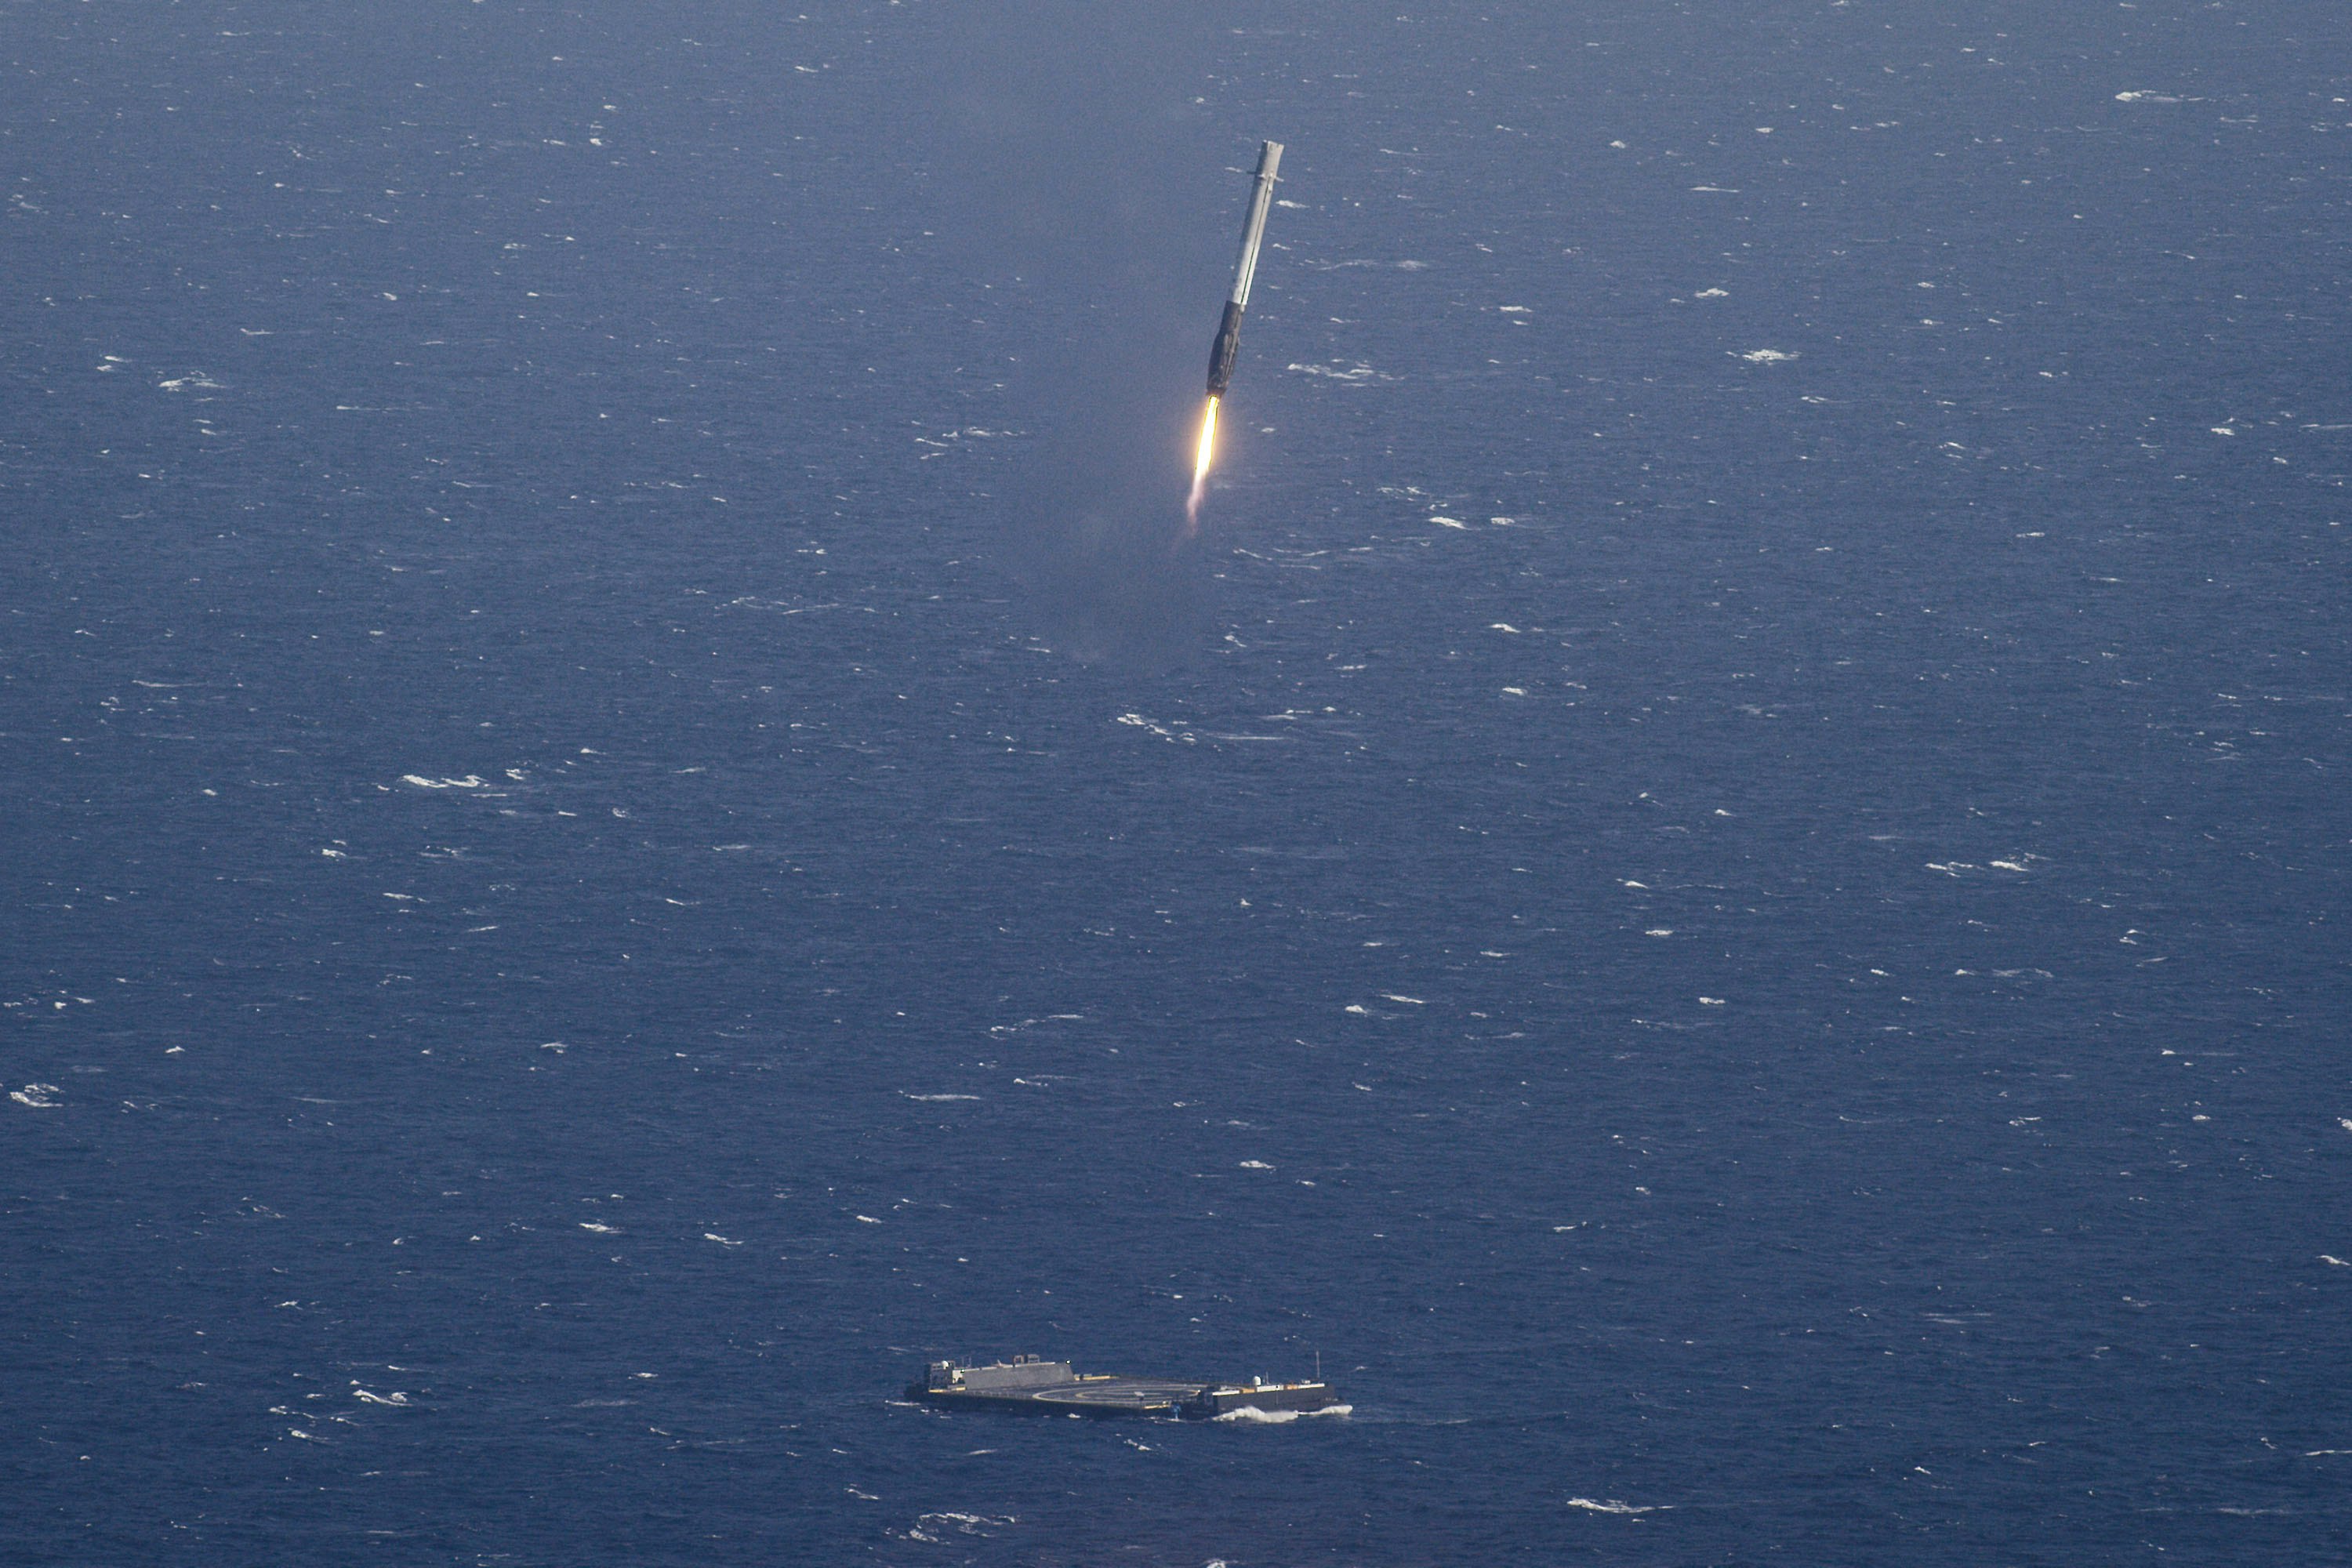 aircraft carrier and missile launching during daytime